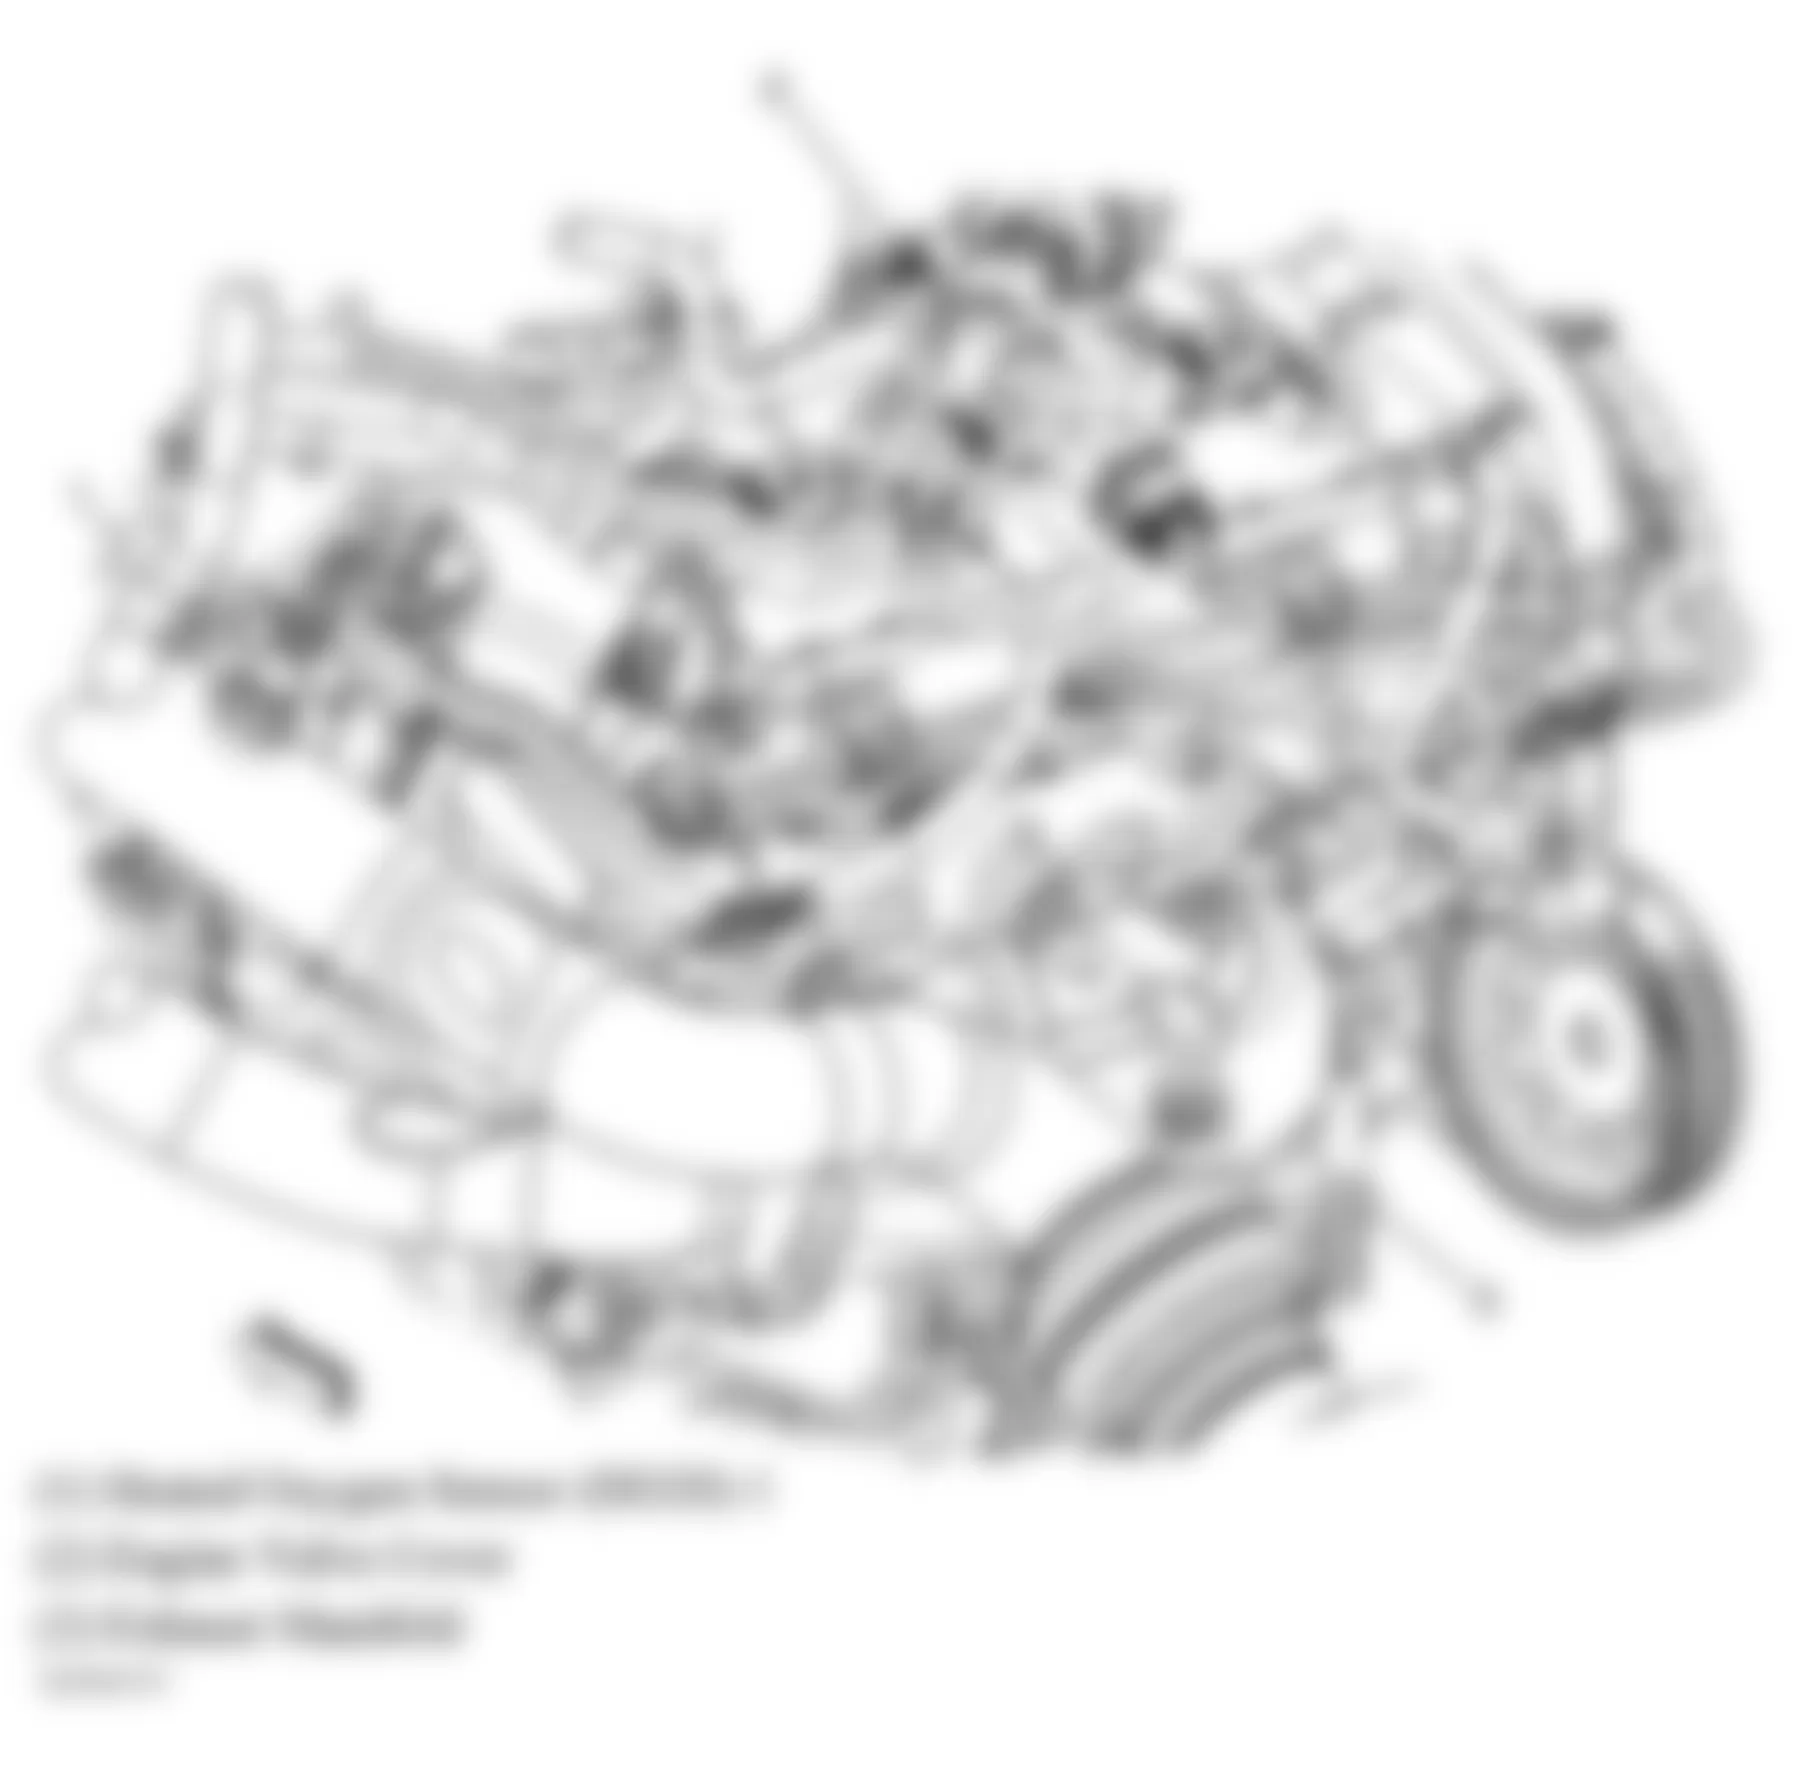 Buick Allure CXL 2006 - Component Locations -  Right Rear Of Engine (3.6L)